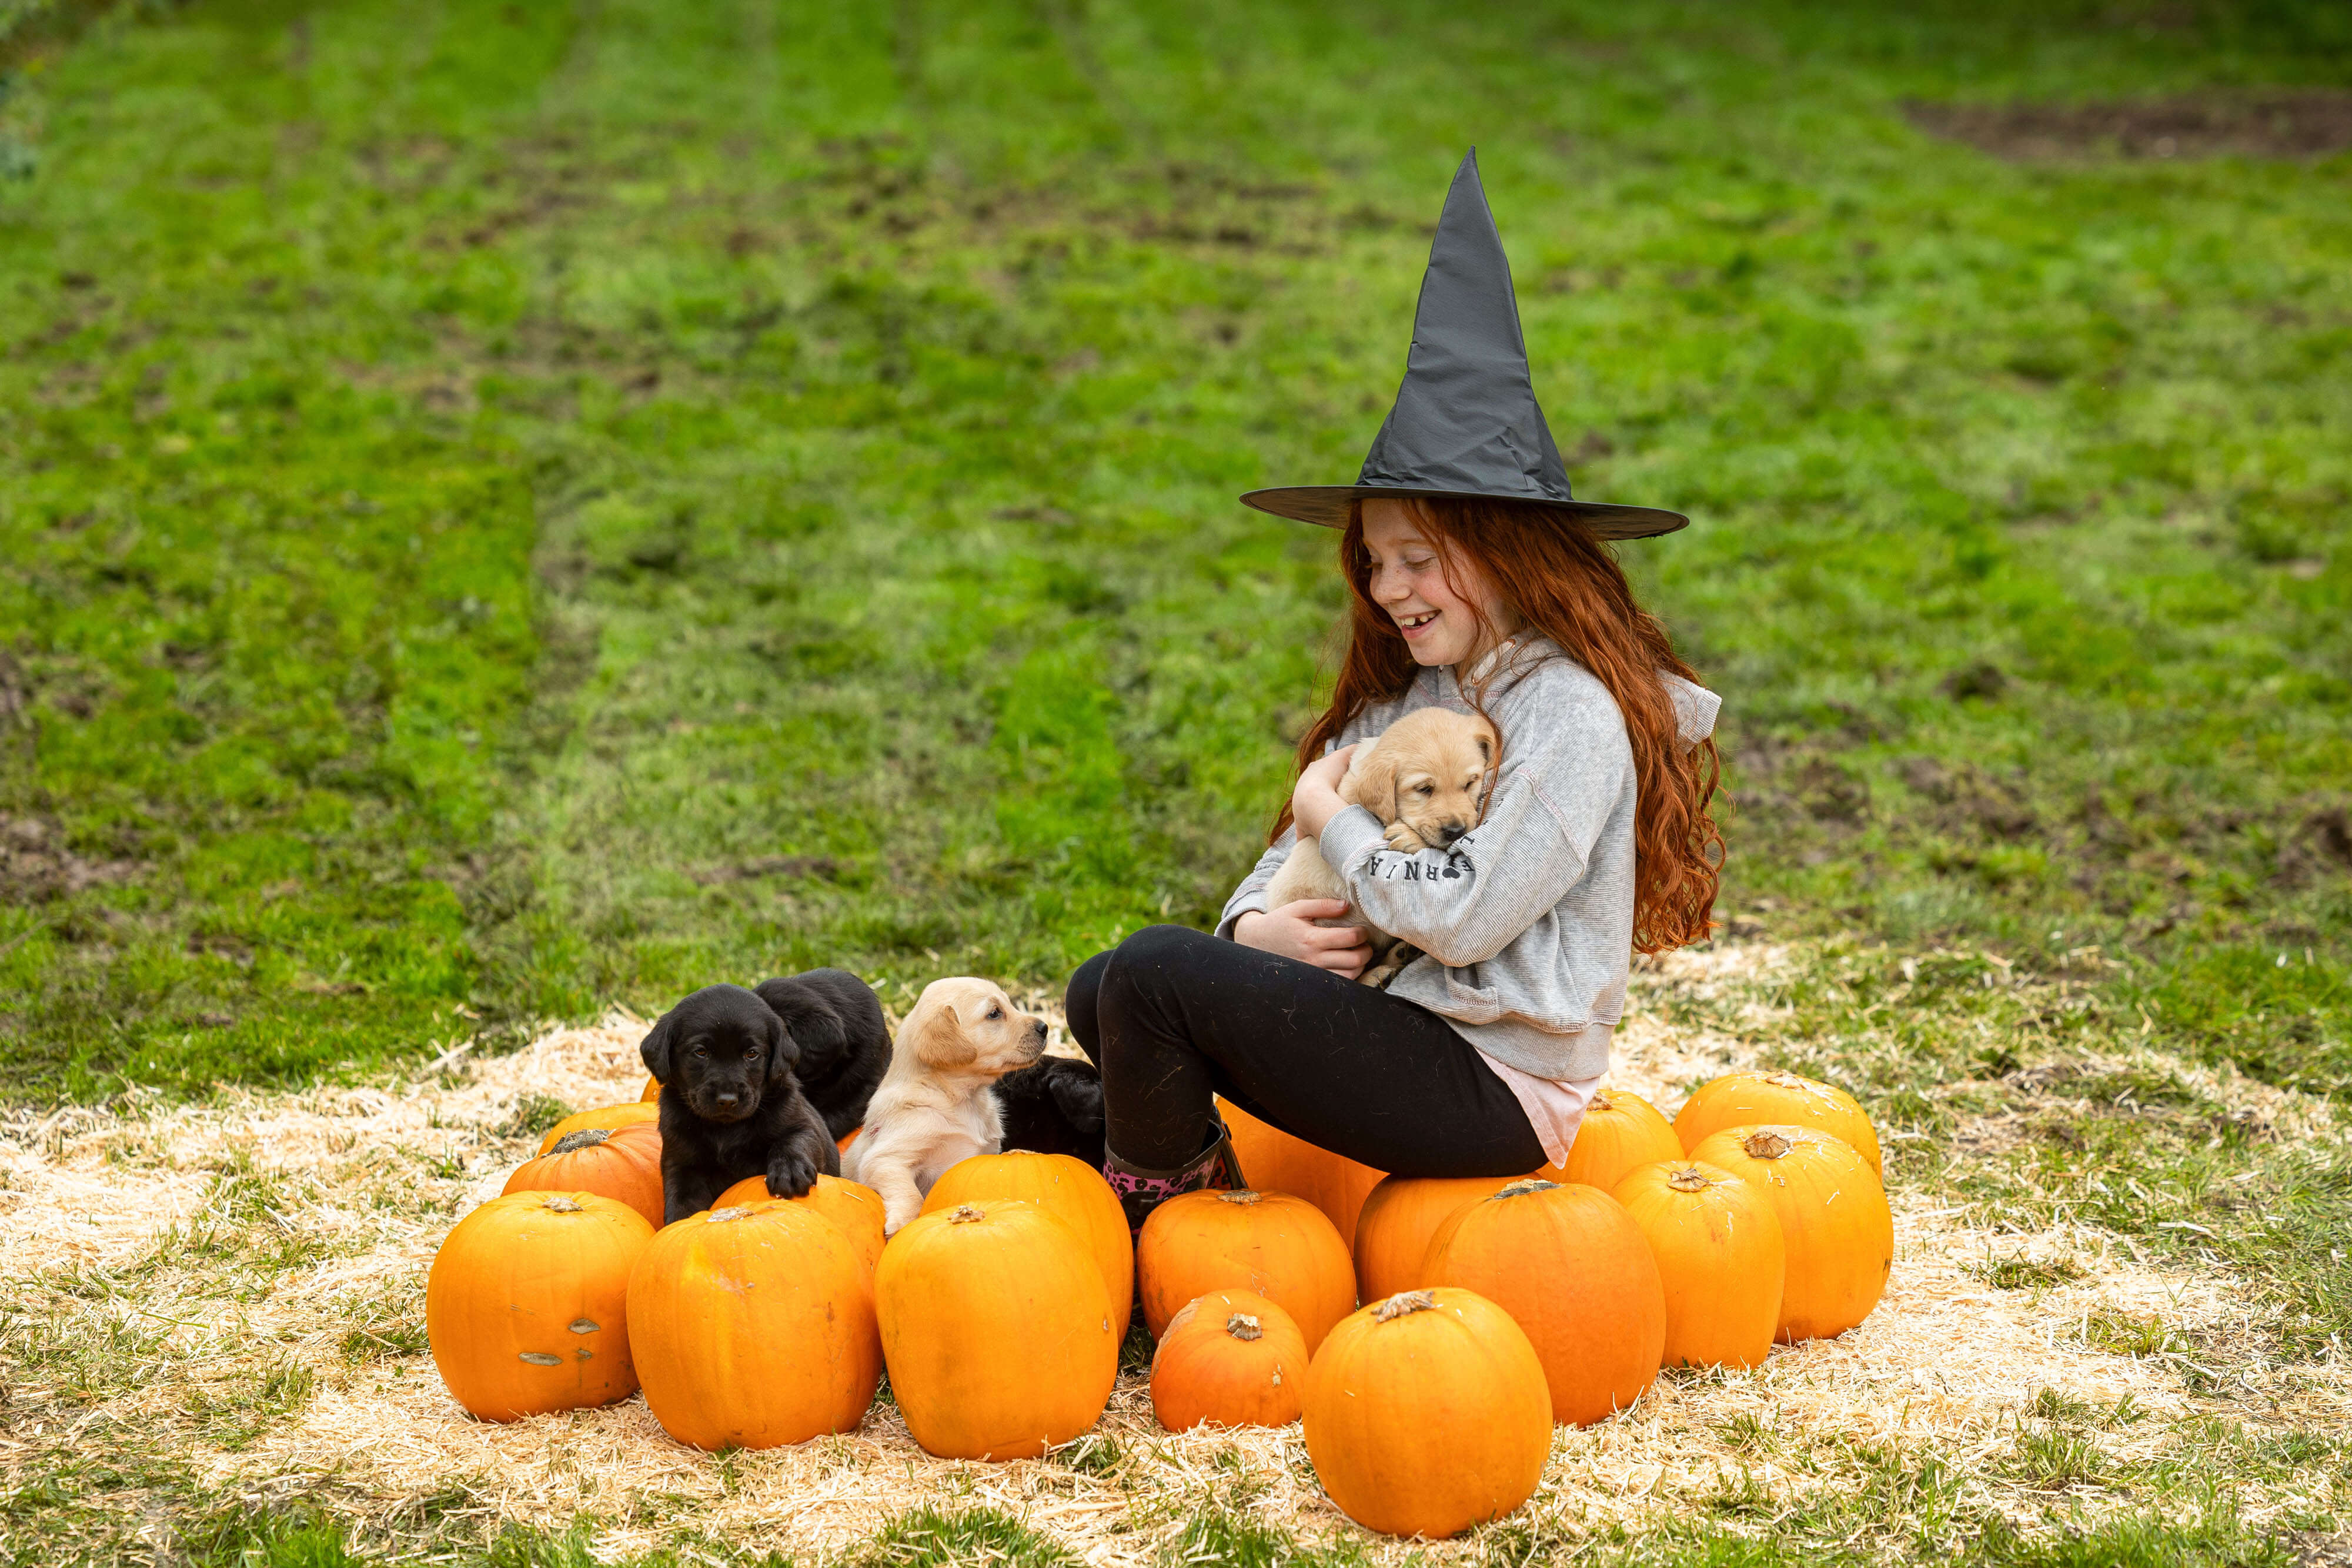 A smiley girl around the age of 8 sits surrounded by pumpkins. She has long red hair and freckles and wears a witch's hat, grey hoody and black leggings. She holds a yellow Labrador puppy, with more puppies sat at her feet.